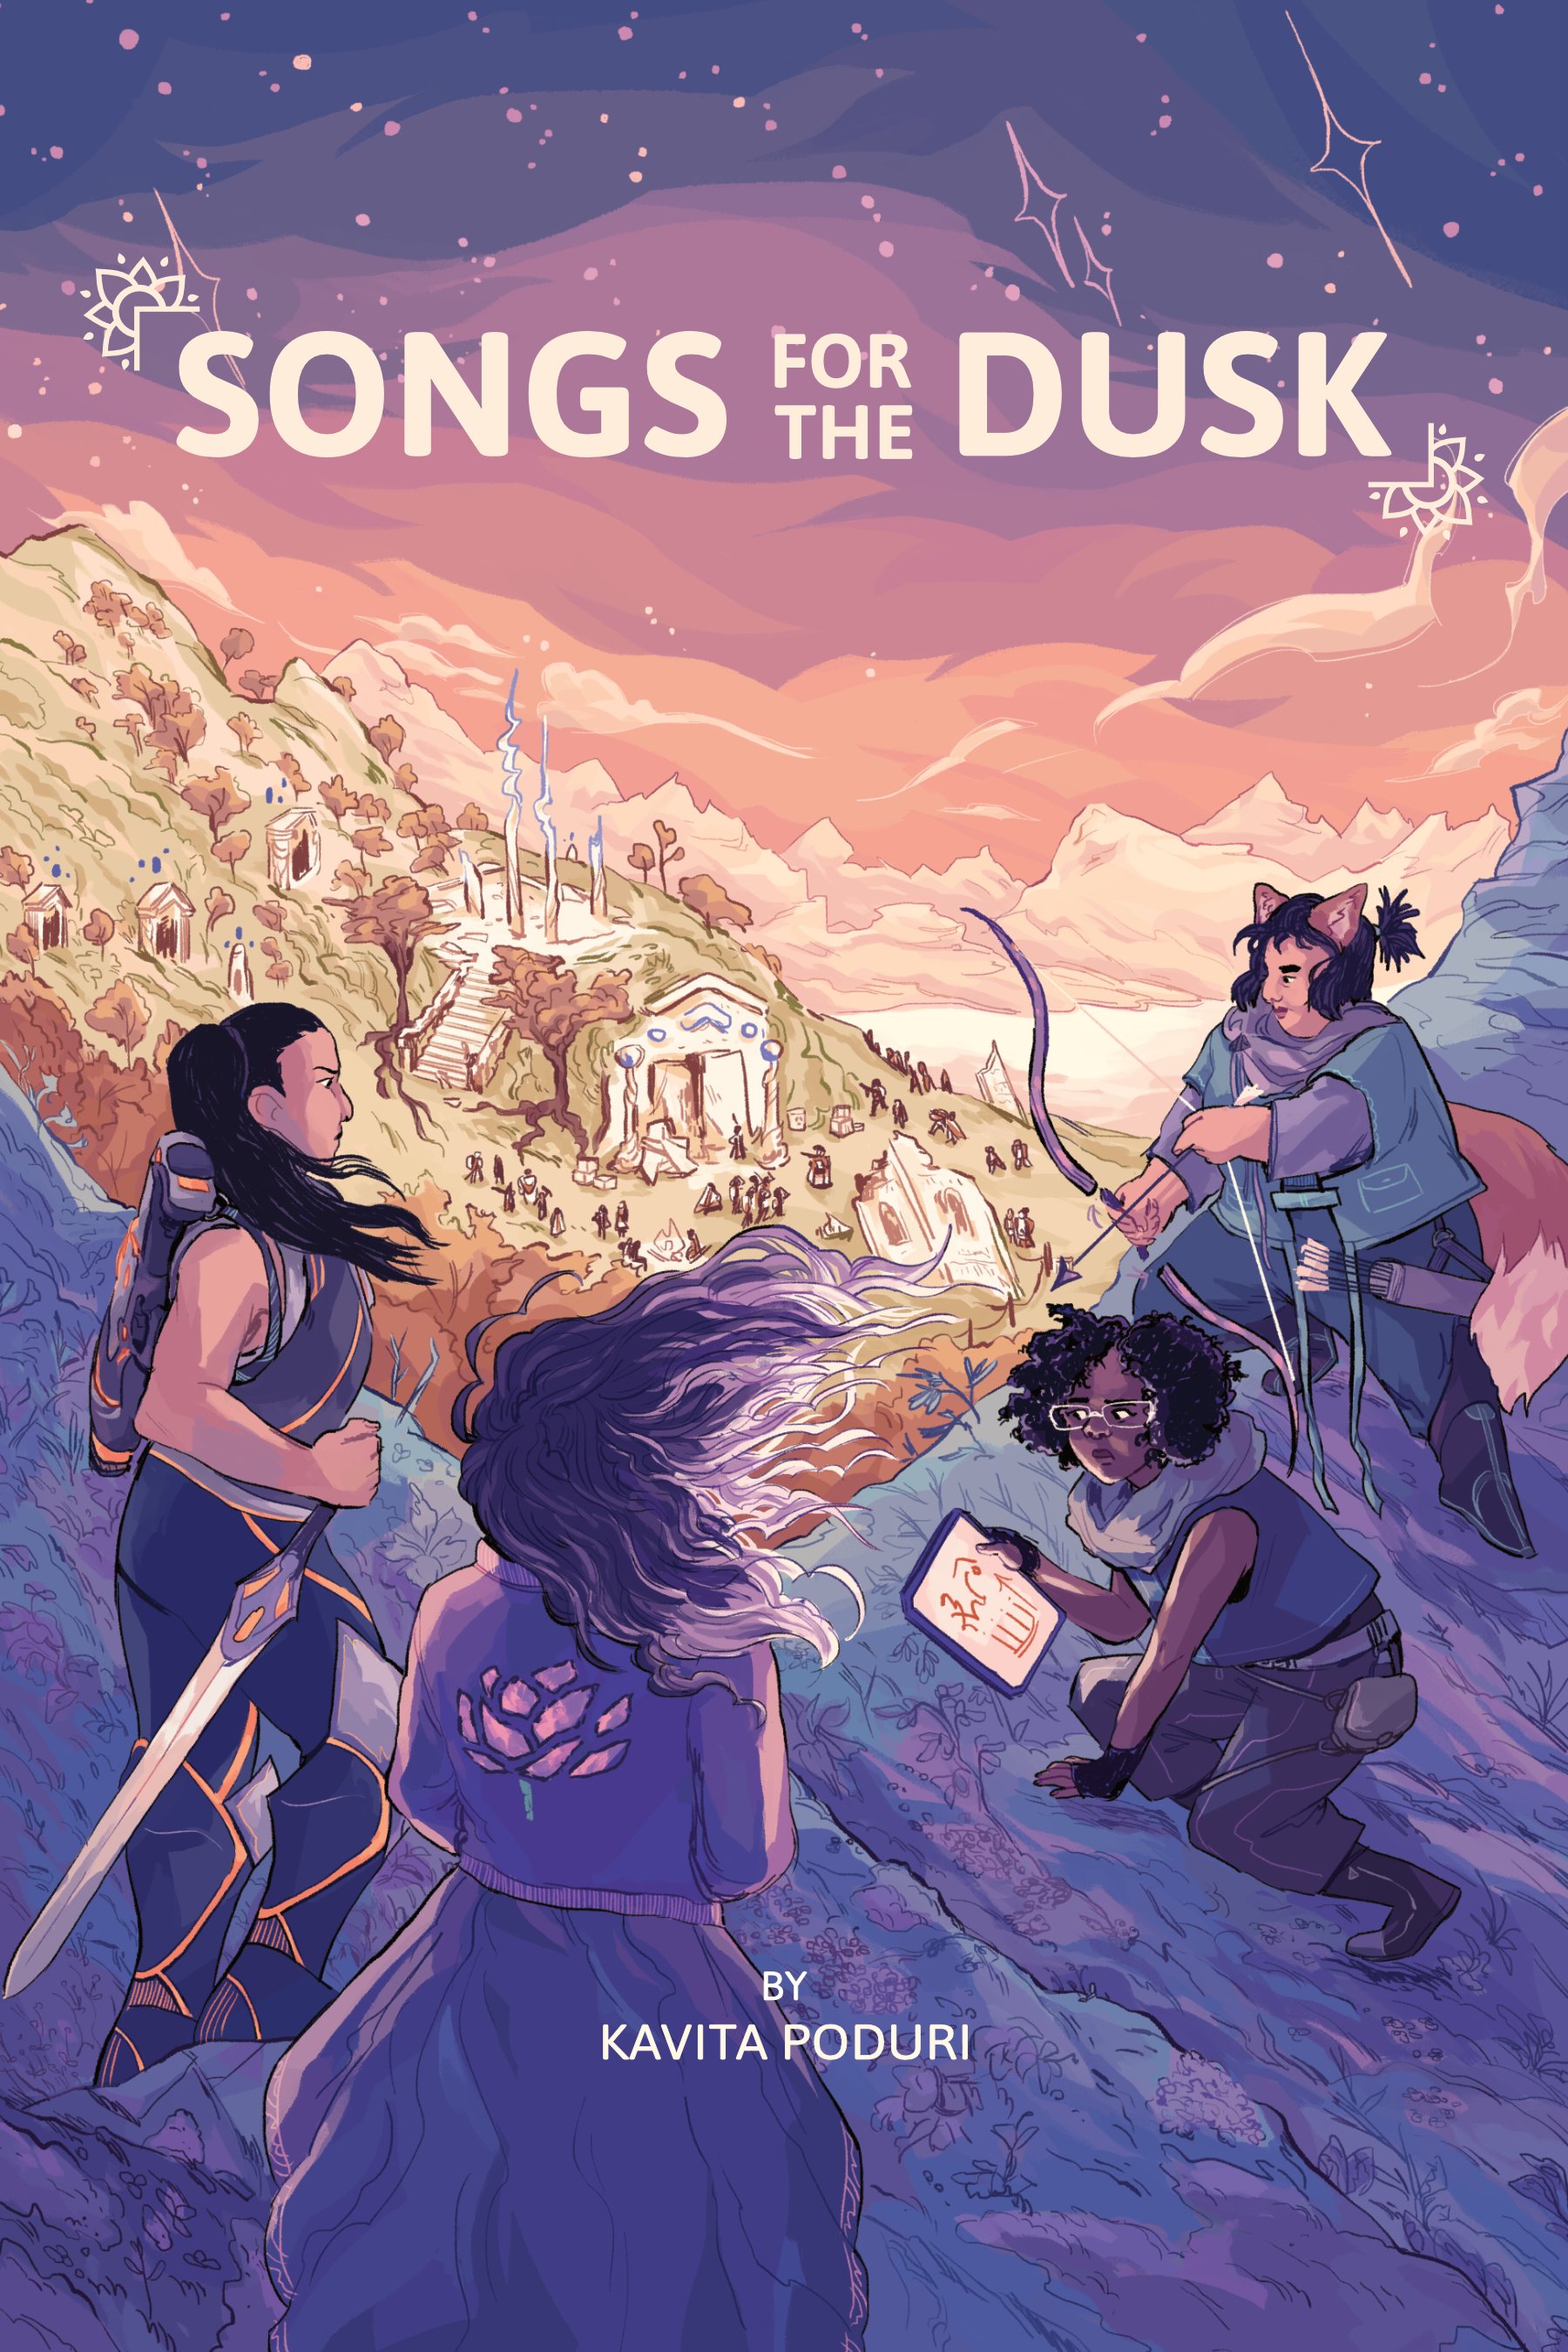 The cover of SONGS FOR THE DUSK, by Kavita Poduri, featuring a pastel-palette illustration of four figures watching over a distant valley with a number of soldiers in it.